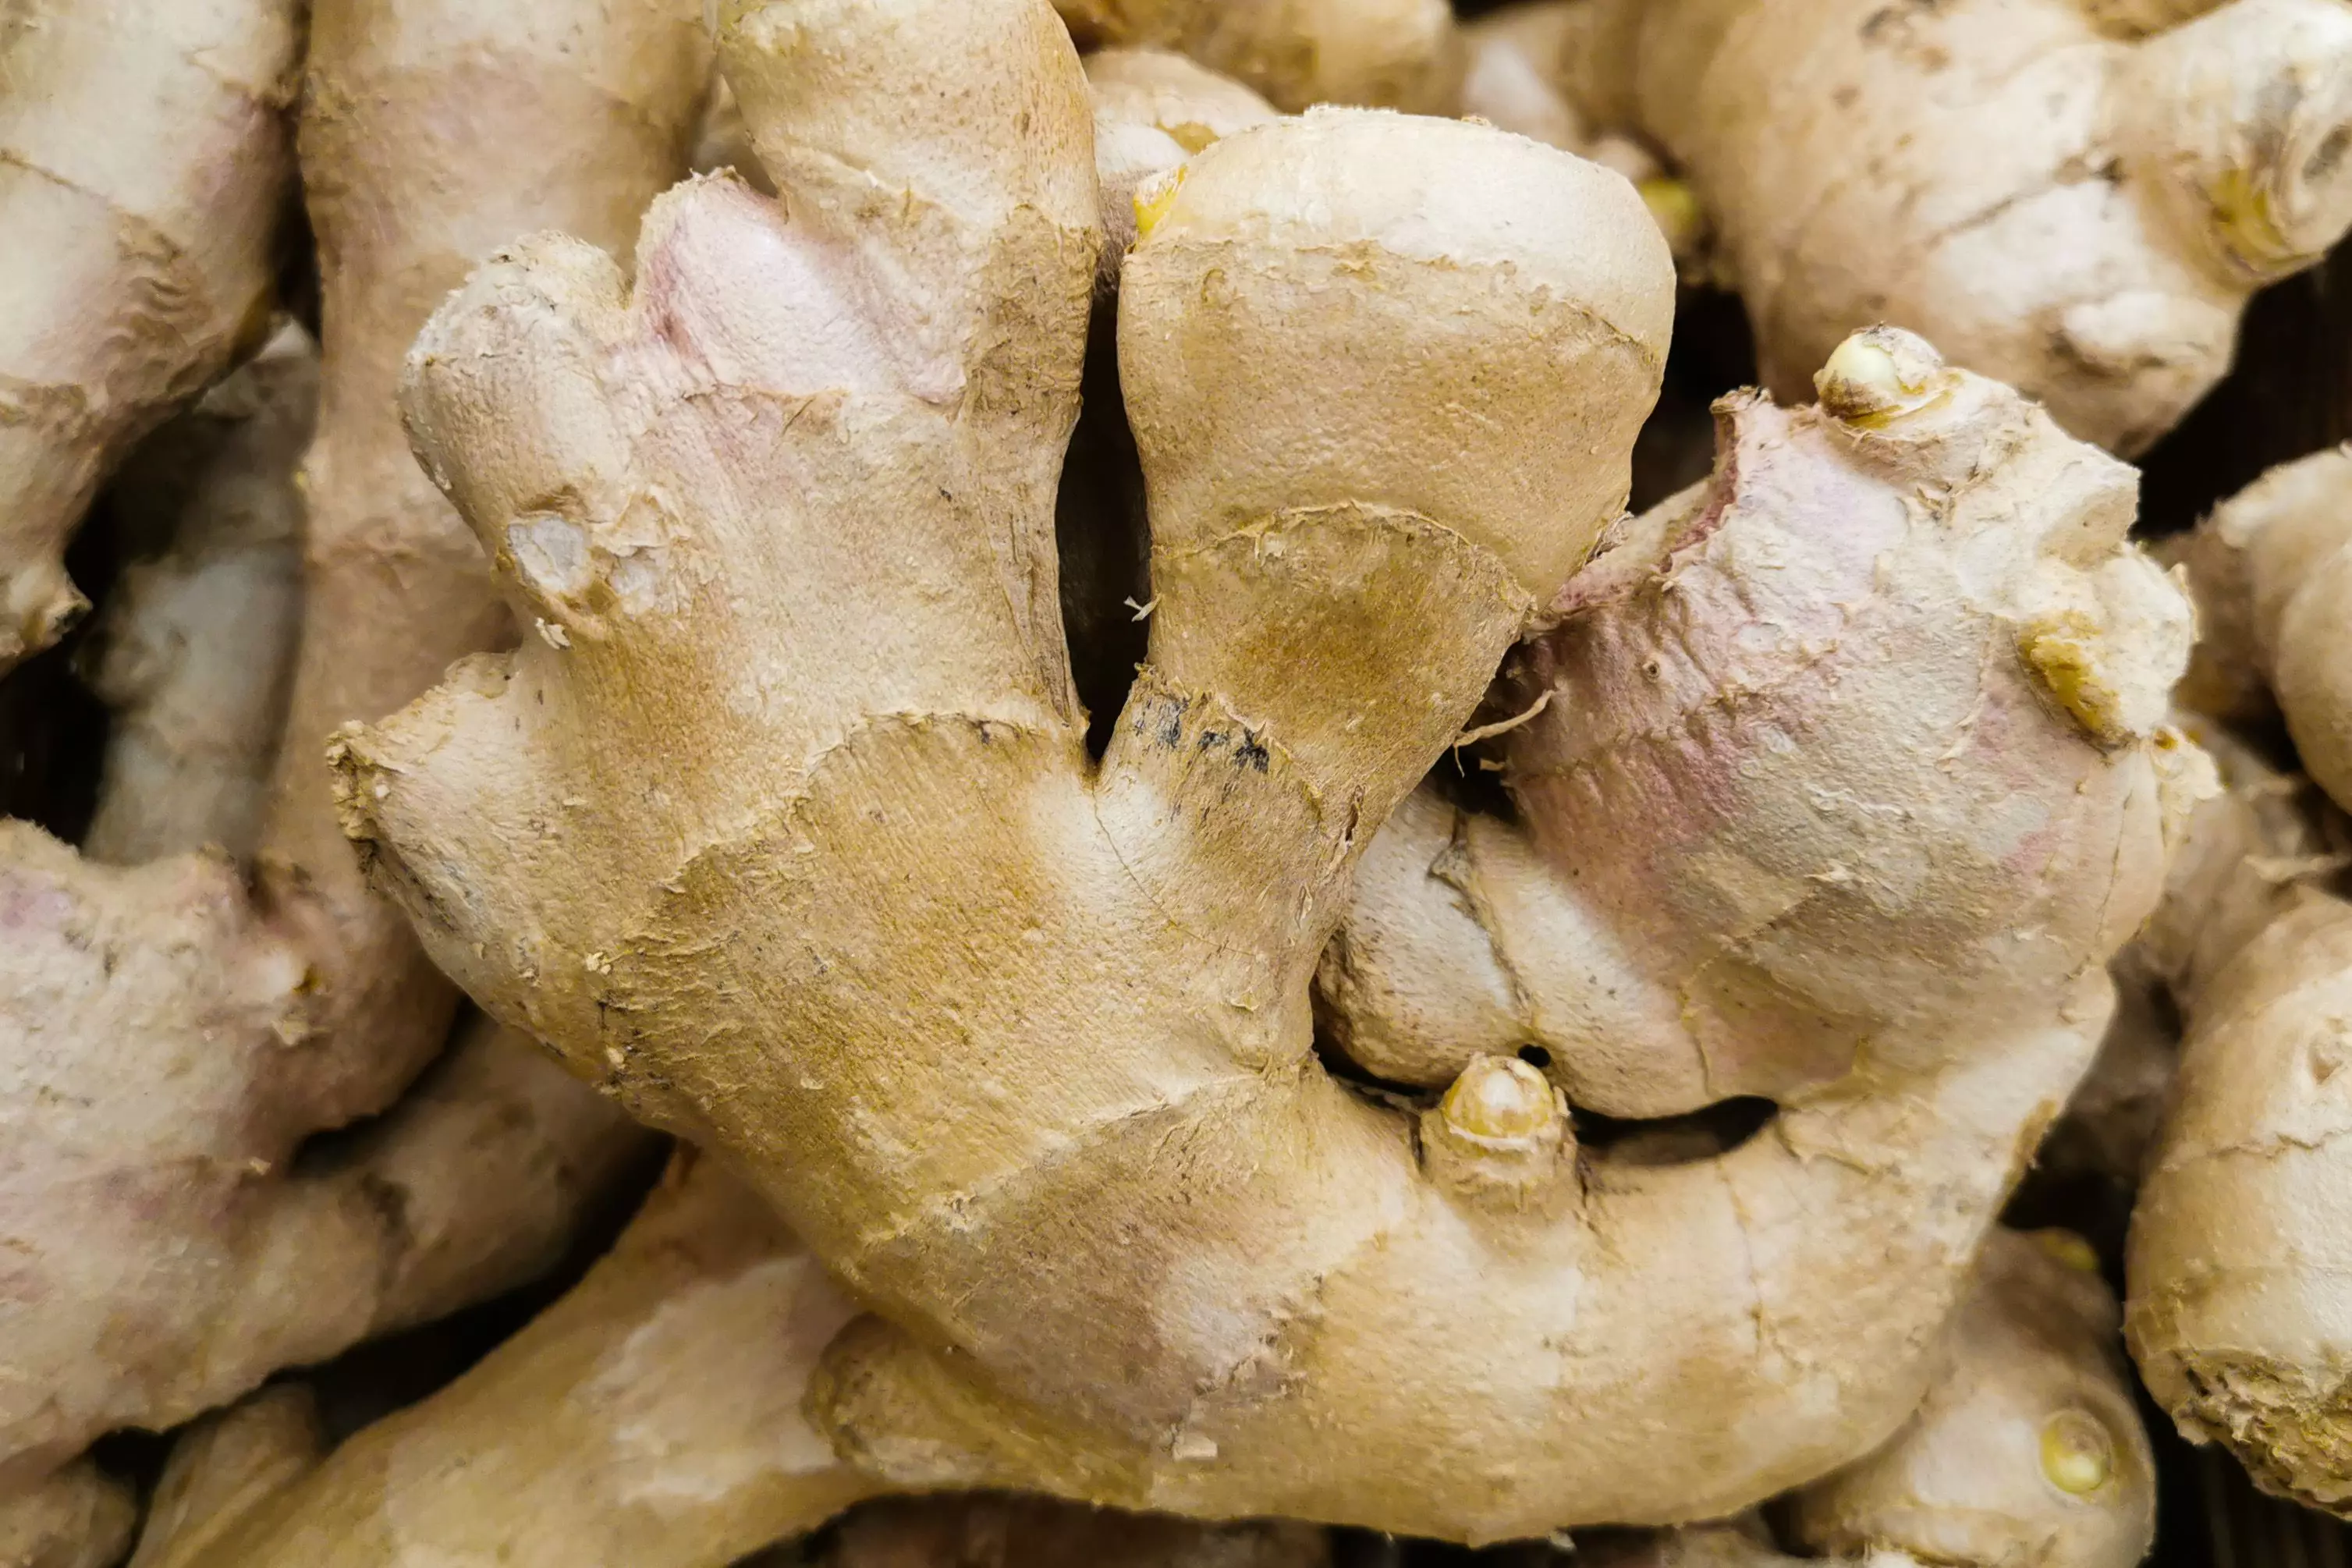 Ginger is known for a variety of health benefits and is filled with antioxidants (